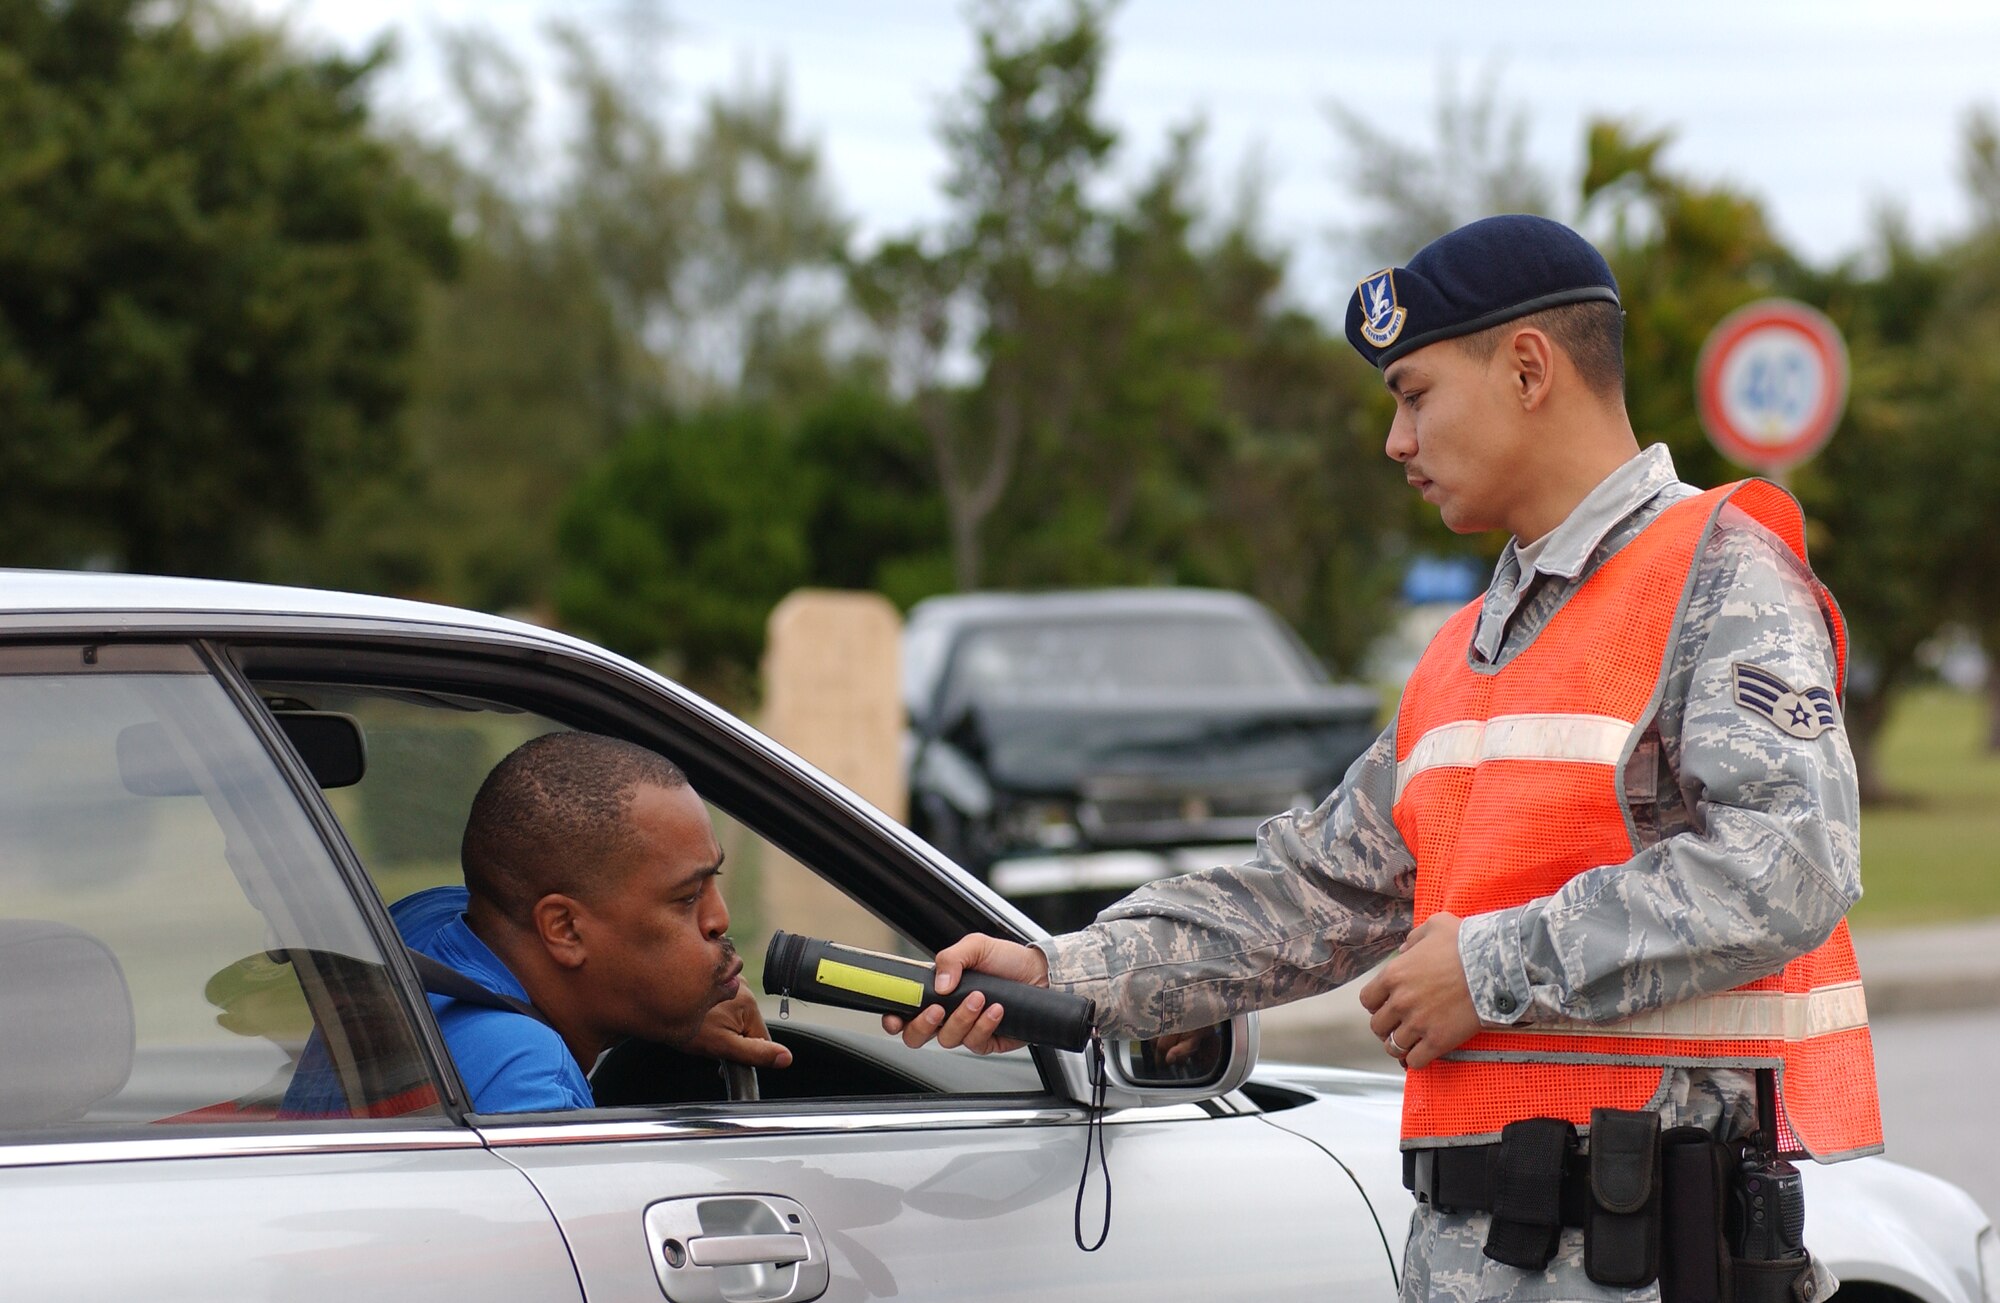 Senior Airman John Camacho, 18th Security Forces Squadron traffic safety unit, makes a traffic checkpoint to conduct a sobriety test using an alcohol detector at different areas on the base December 23, 2008. Kadena law enforcement officials and Okinawa police will exercise increased vigilance during the holidays to prevent drunk driving and keep the roads safe.  (U.S. Air Force photo/Tech. Sgt. Rey Ramon)  